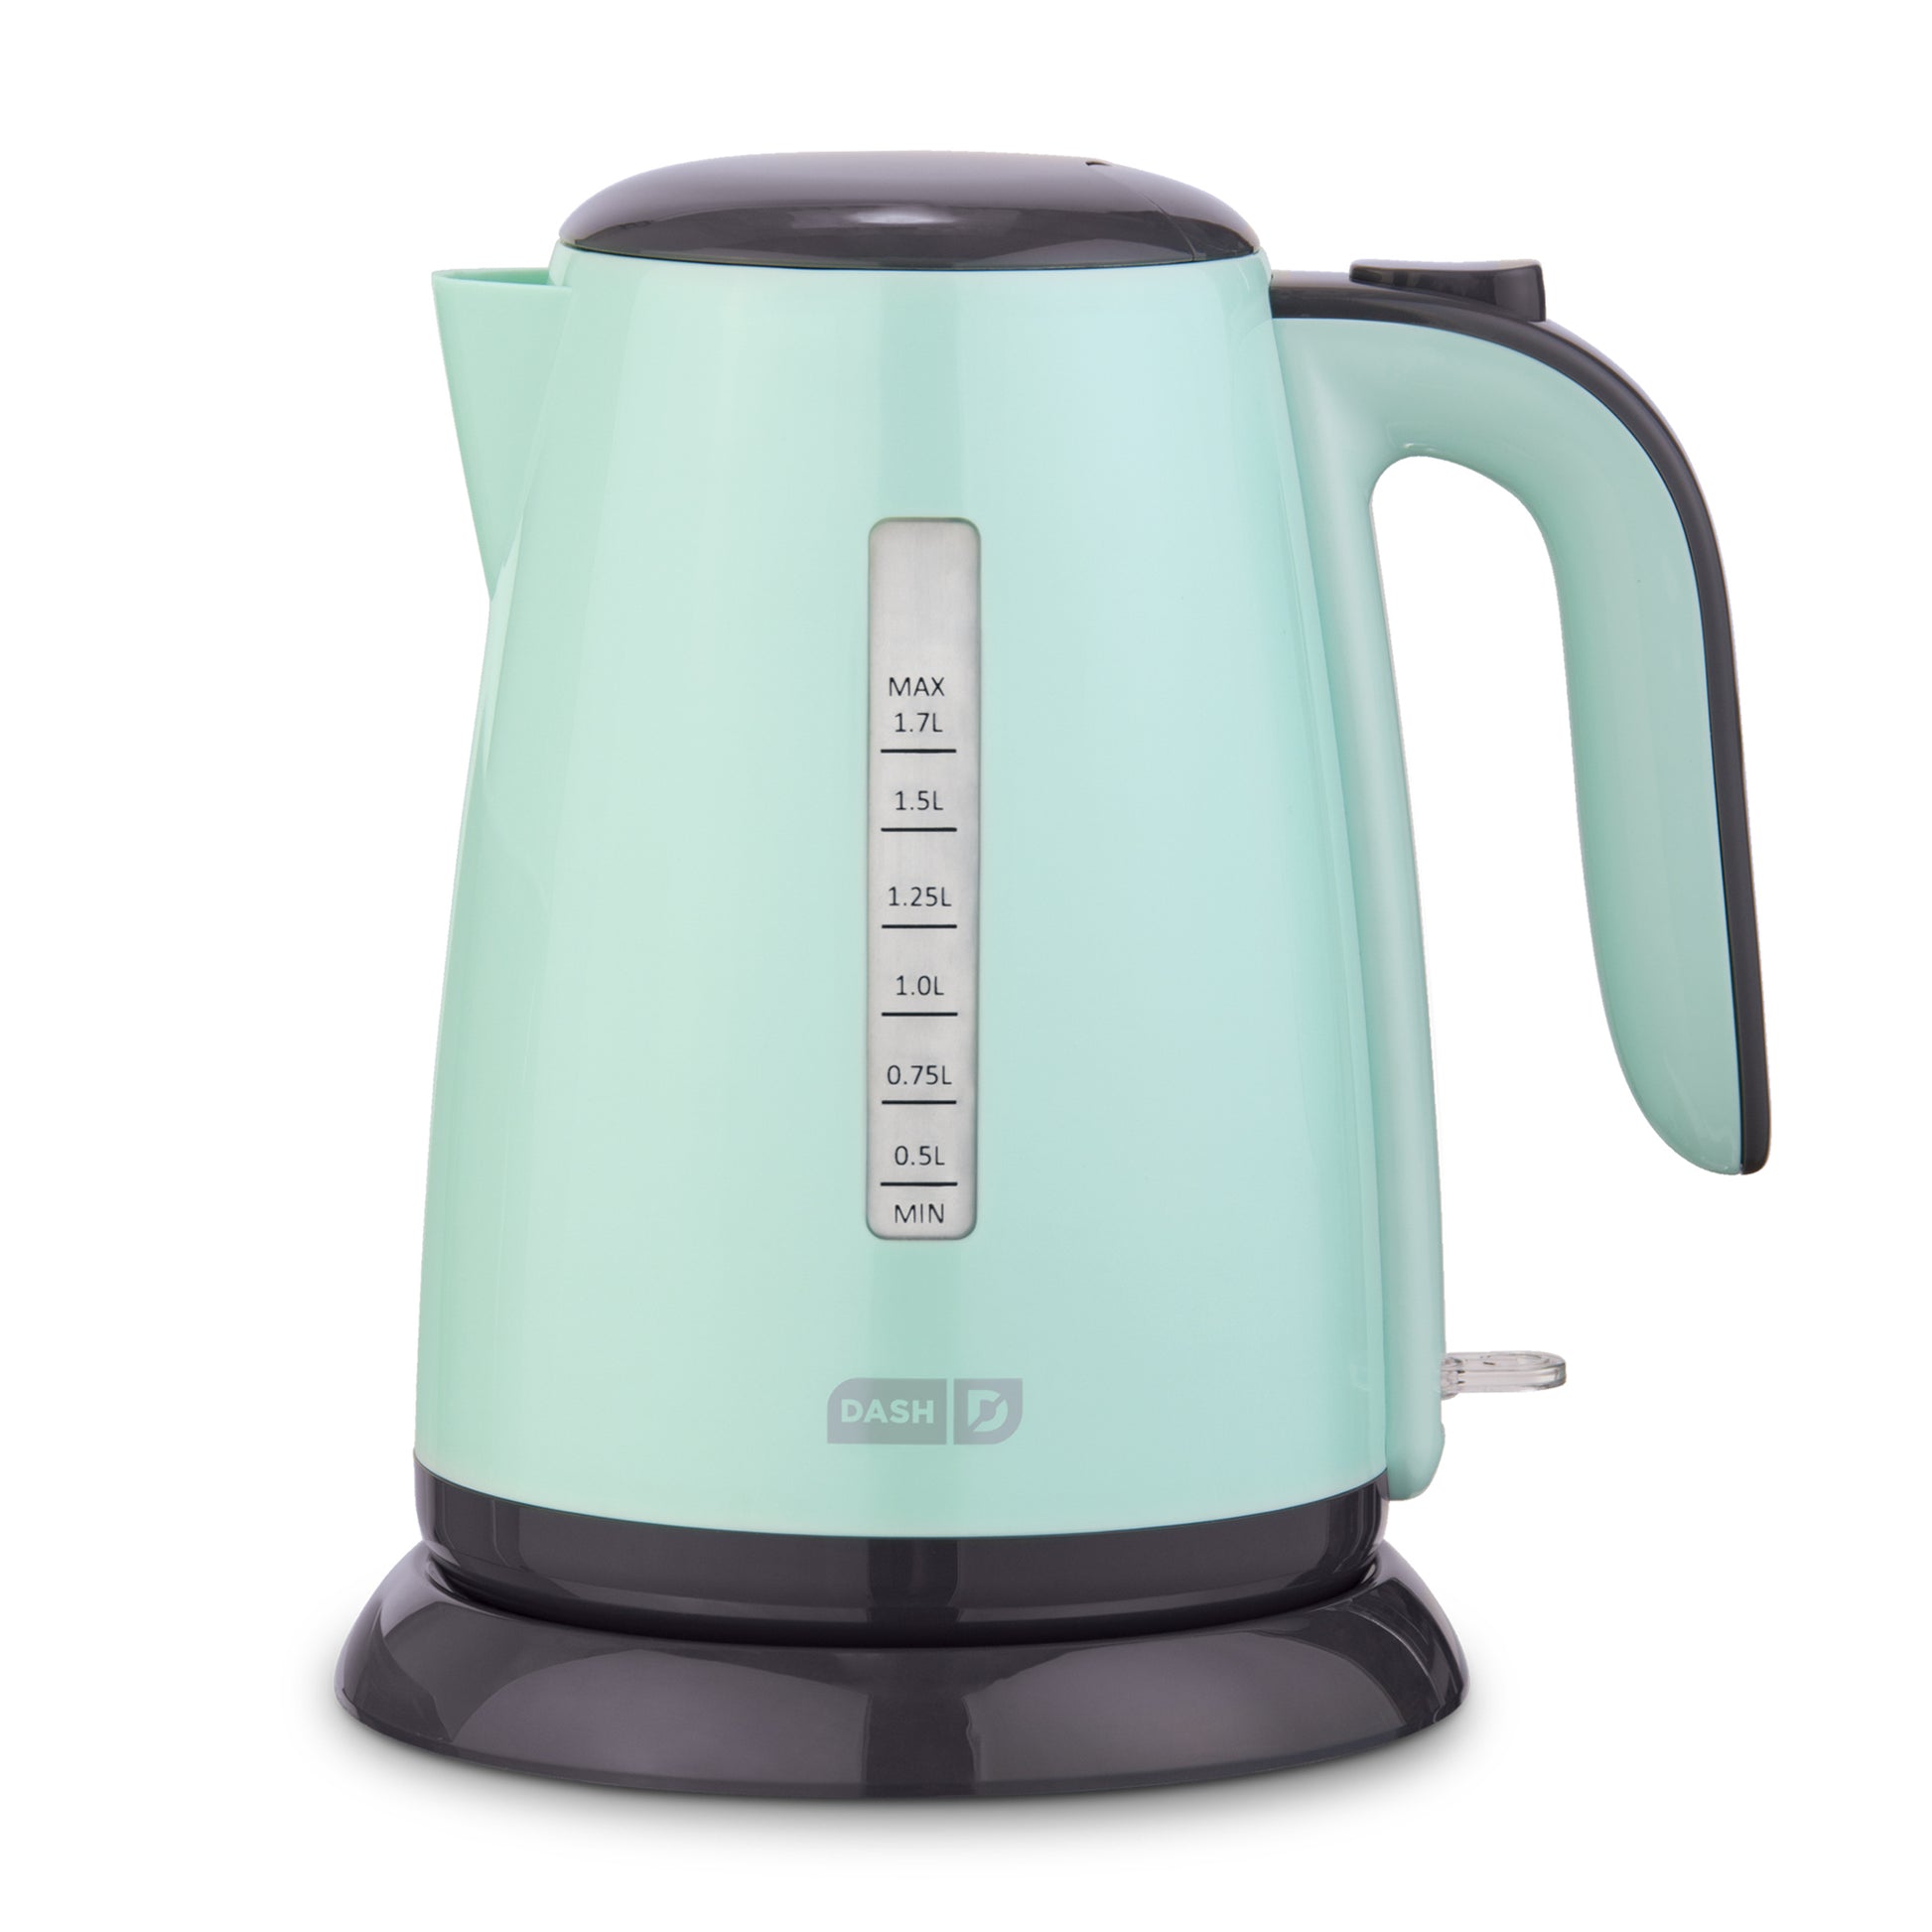 Dash Insulated Electric Kettle Review 